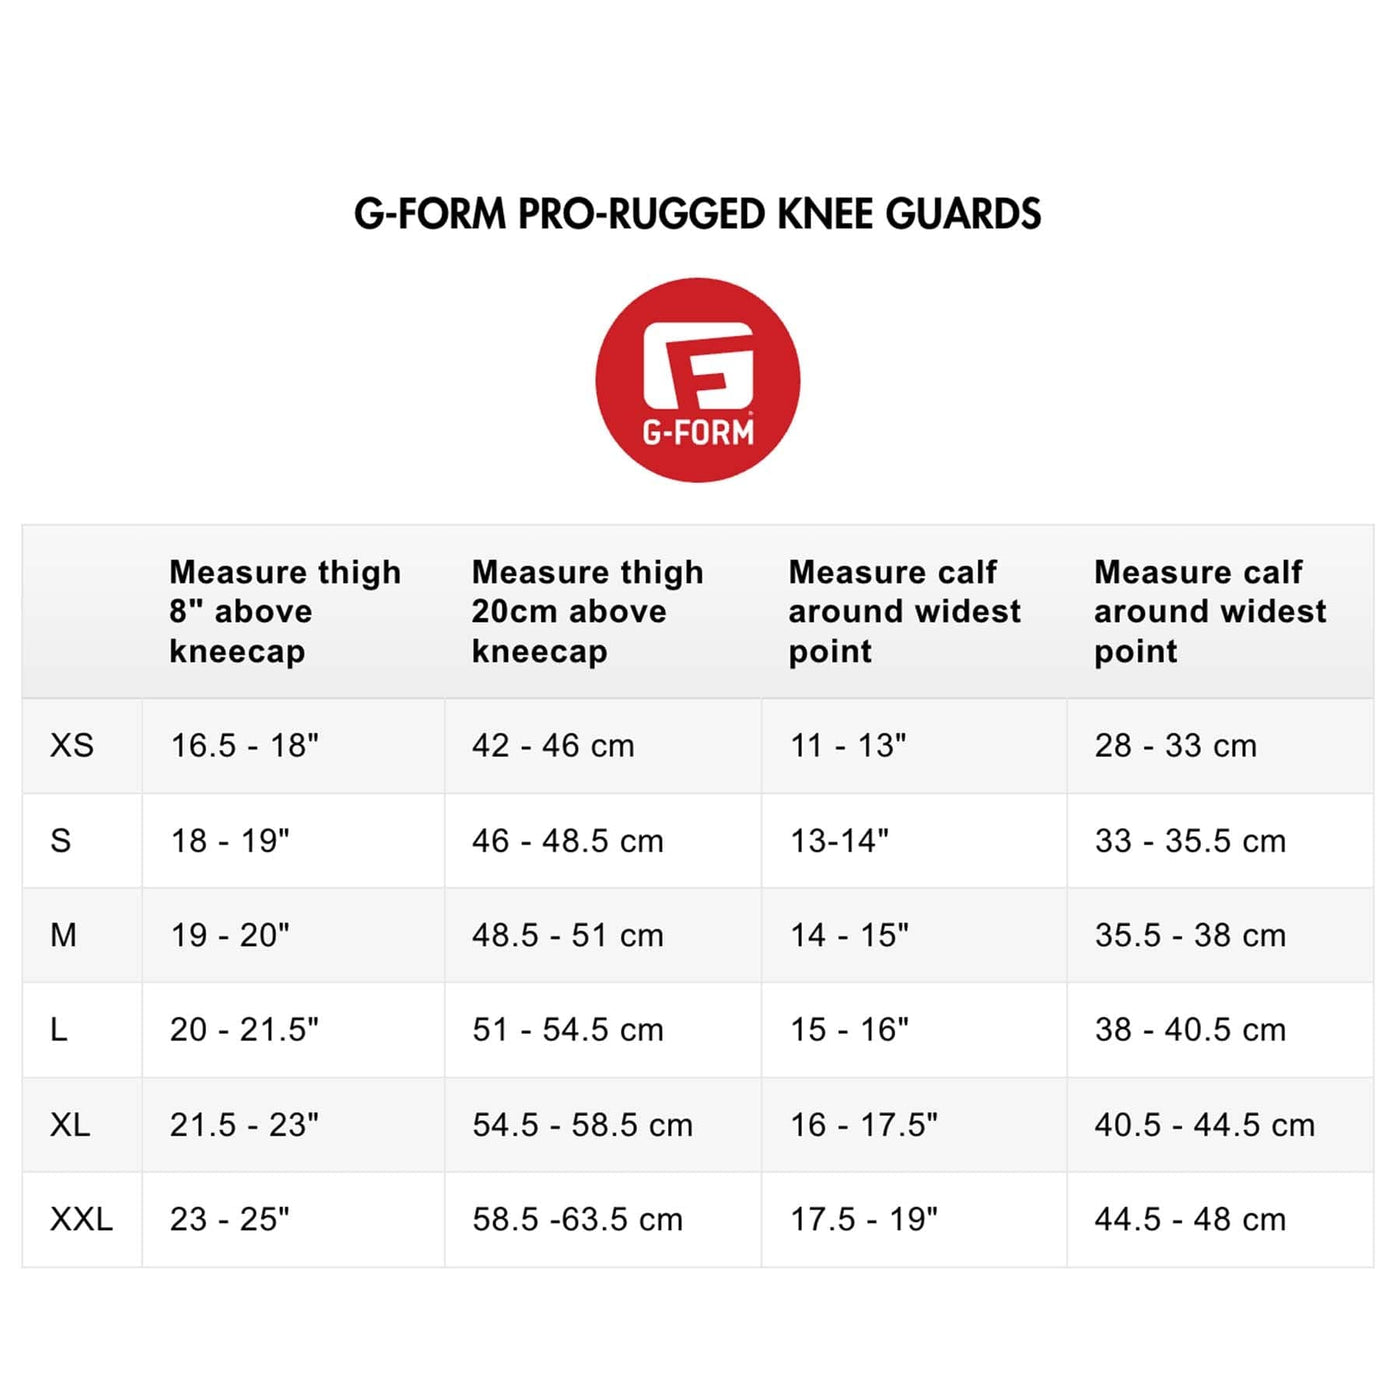 G-FORM PRO-RUGGED KNEE GUARDS SIZE CHART